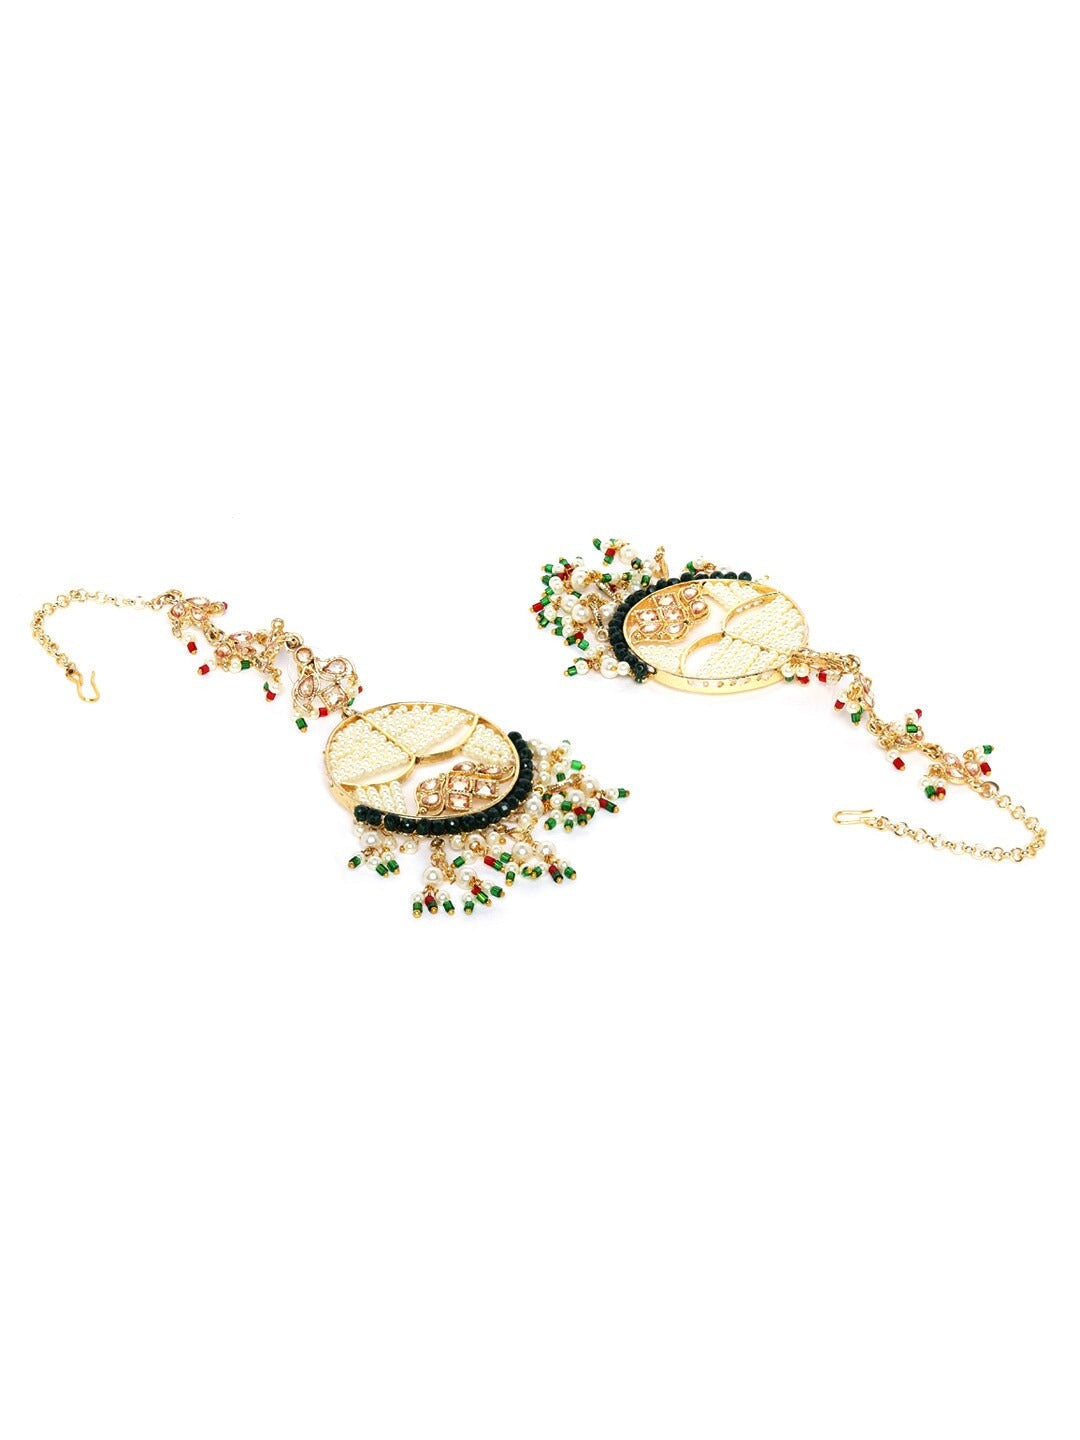 Off-White & Green Gold-Plated Beaded Circular Drop Earrings with Chain